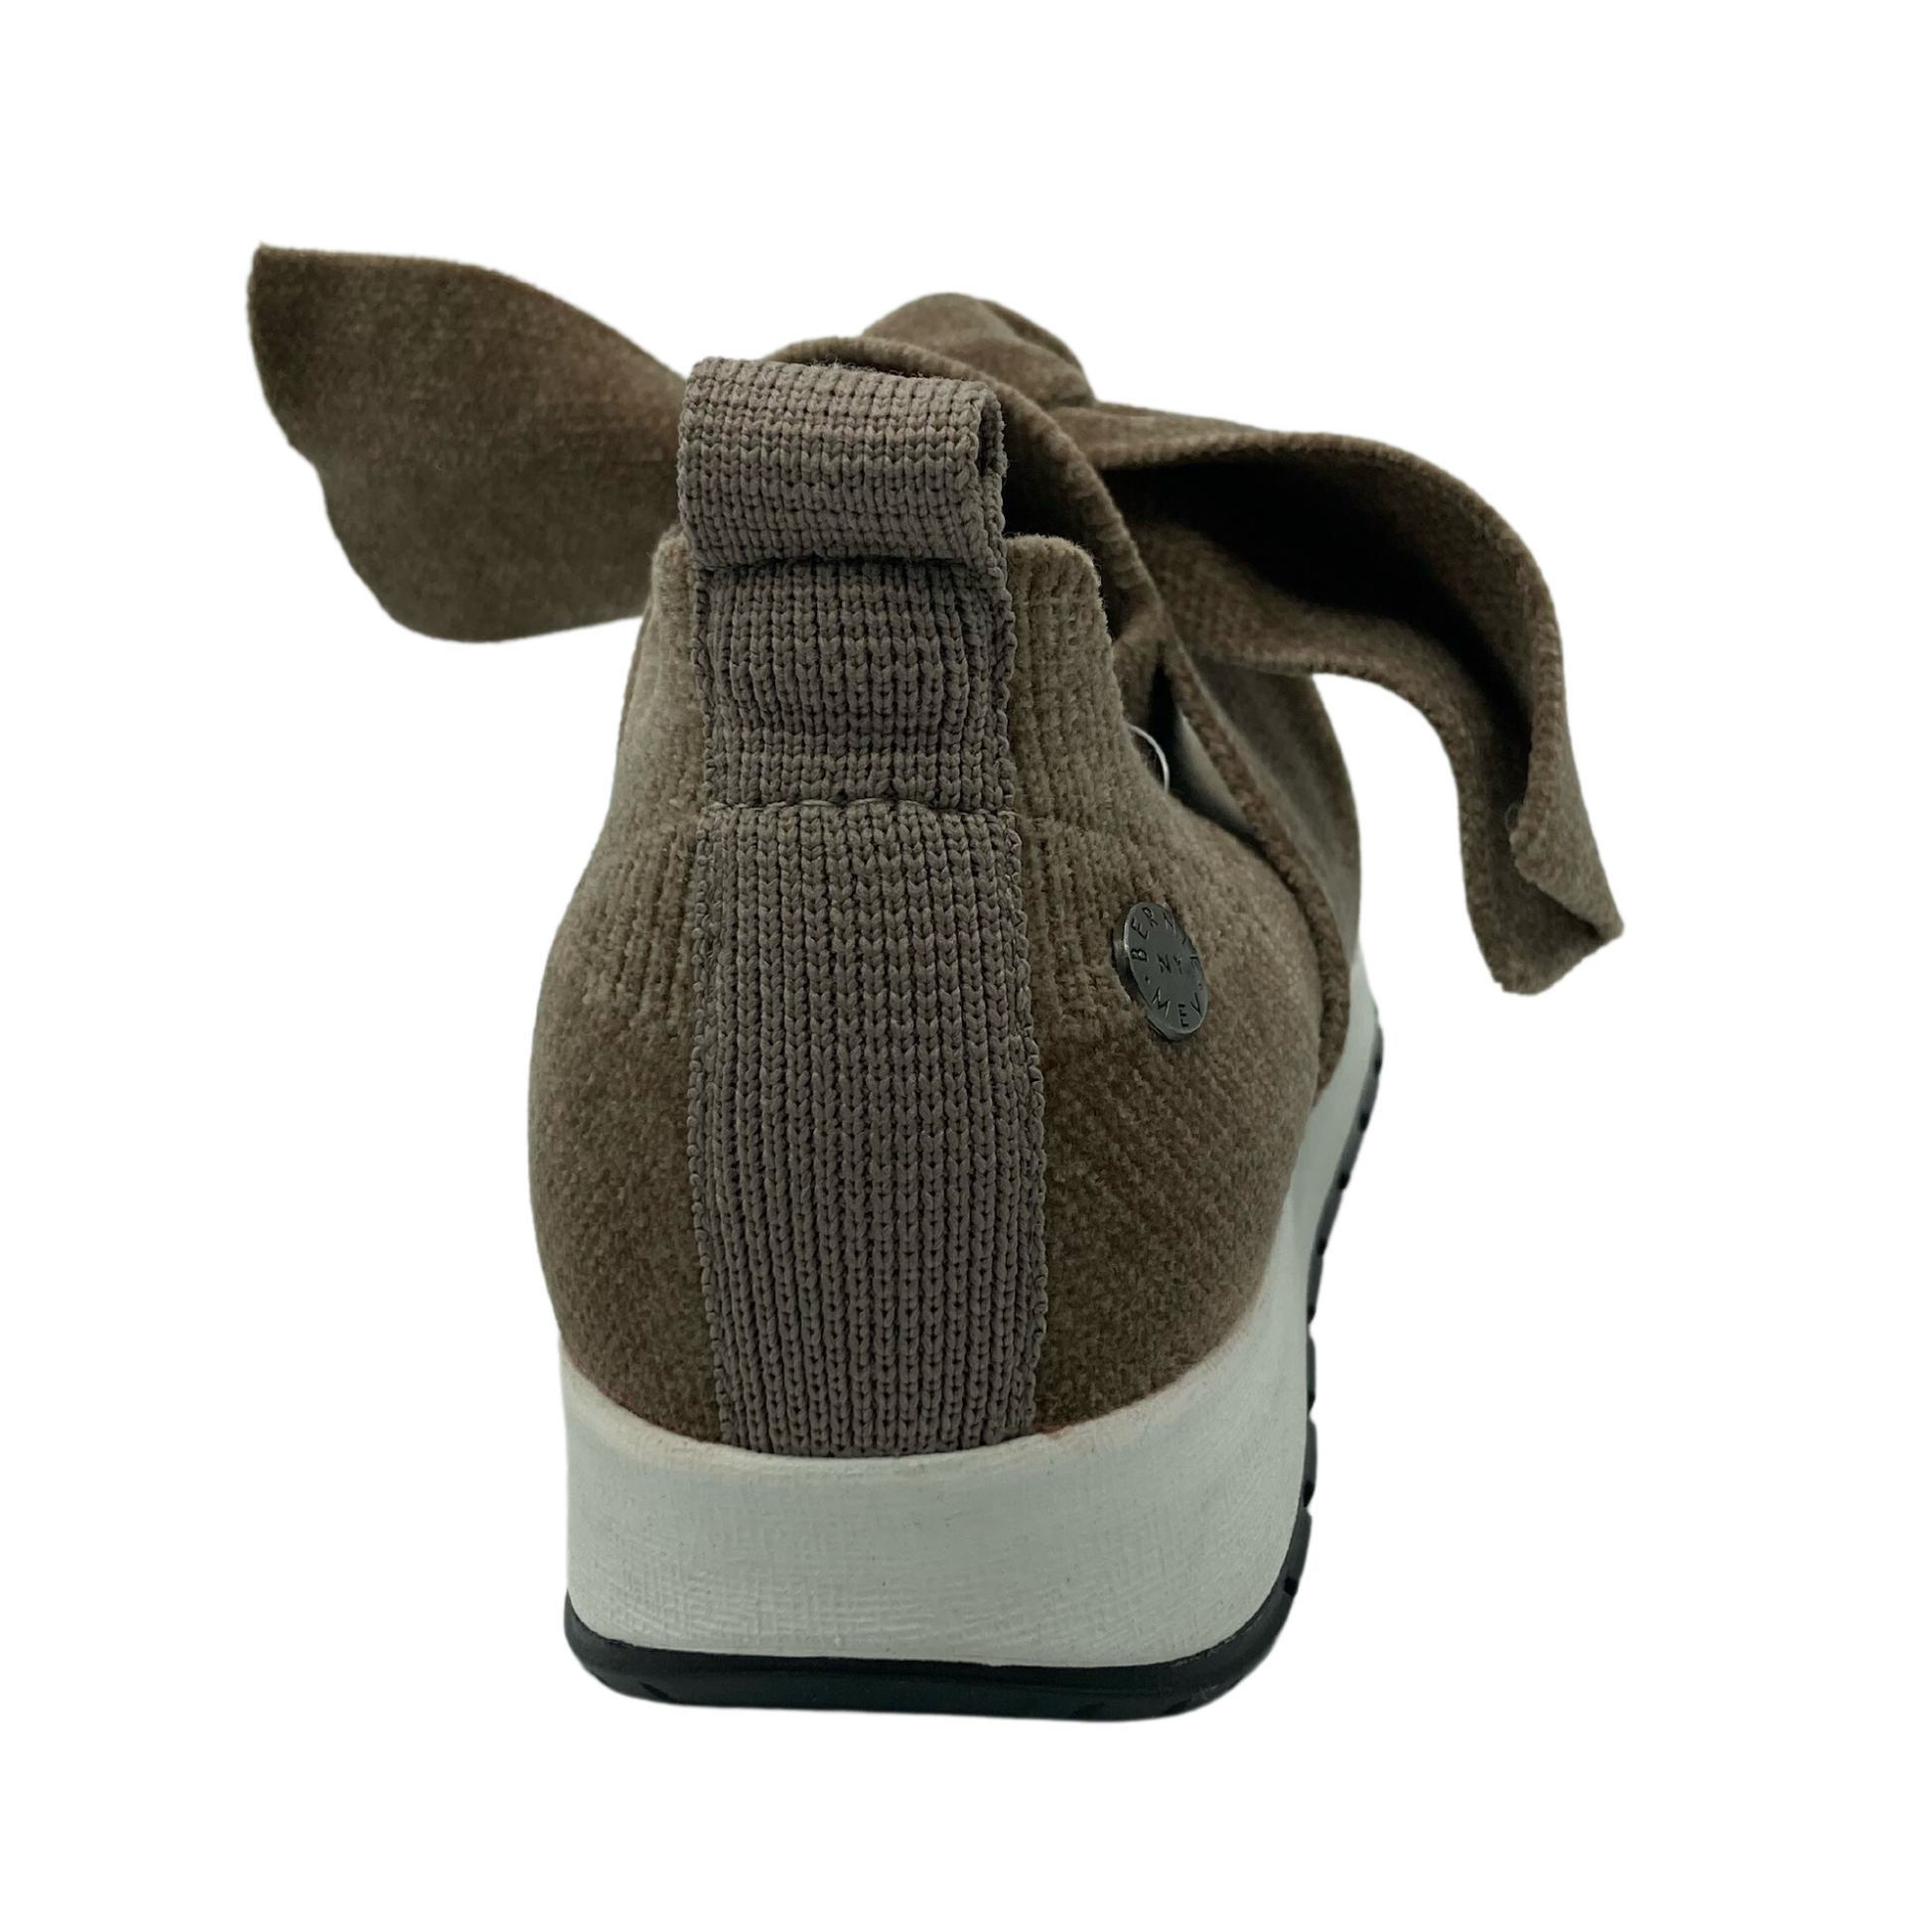 Back view of brown sneaker with large bow detail on upper and white rubber outsole